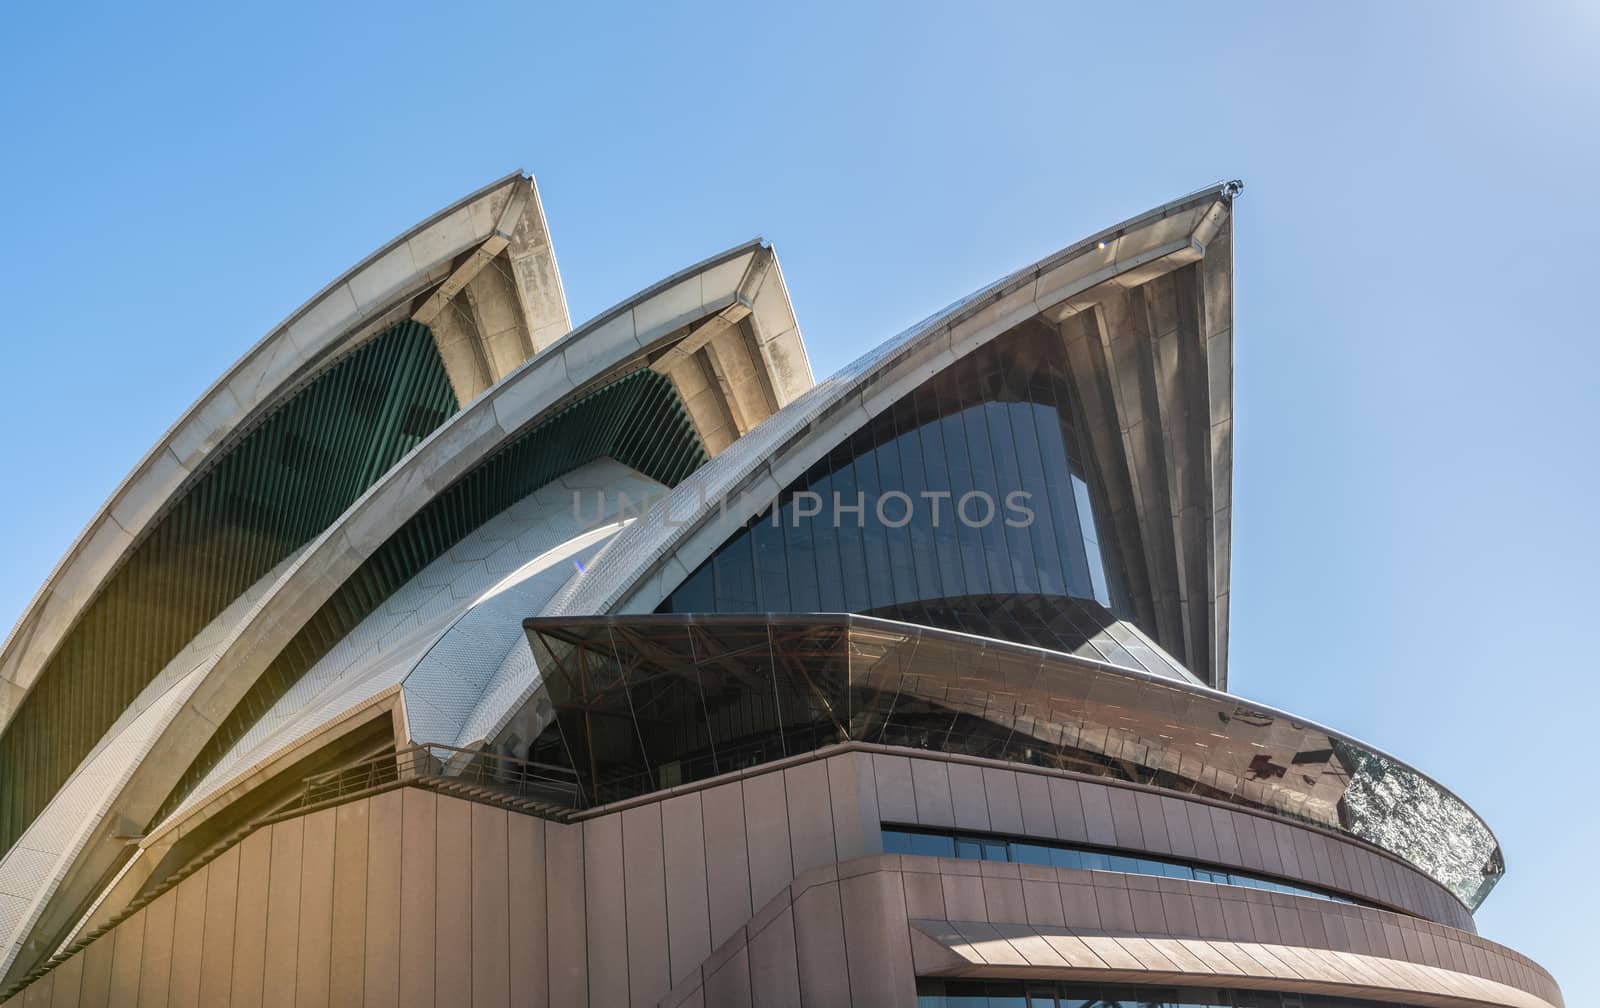 Sydney, Australia - February 11, 2019: Detail of white roof structure of Sydney Opera House against deep blue sky. 6 of 12.